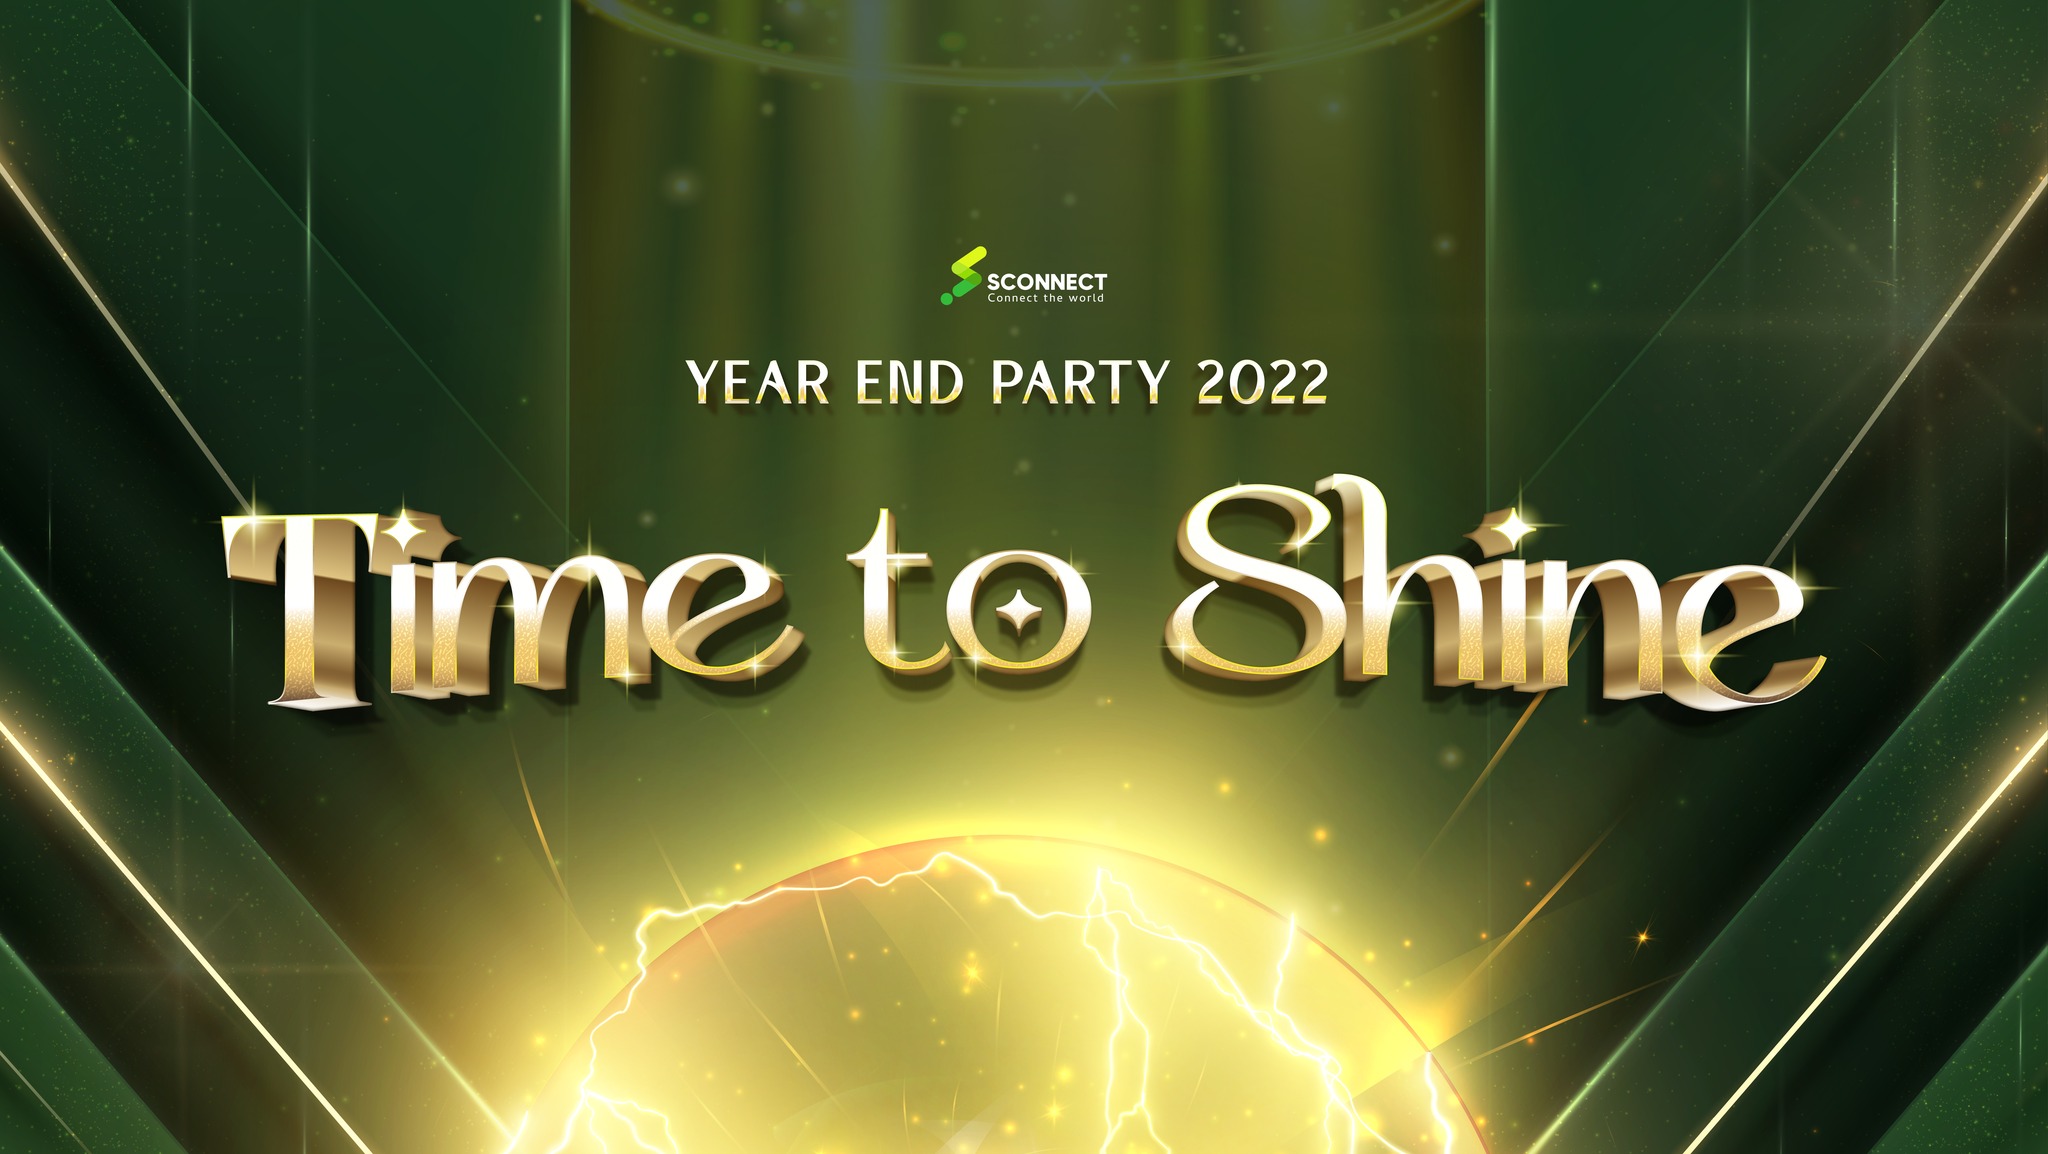 SCONNECT YEAR END PARTY 2022: TIME TO SHINE